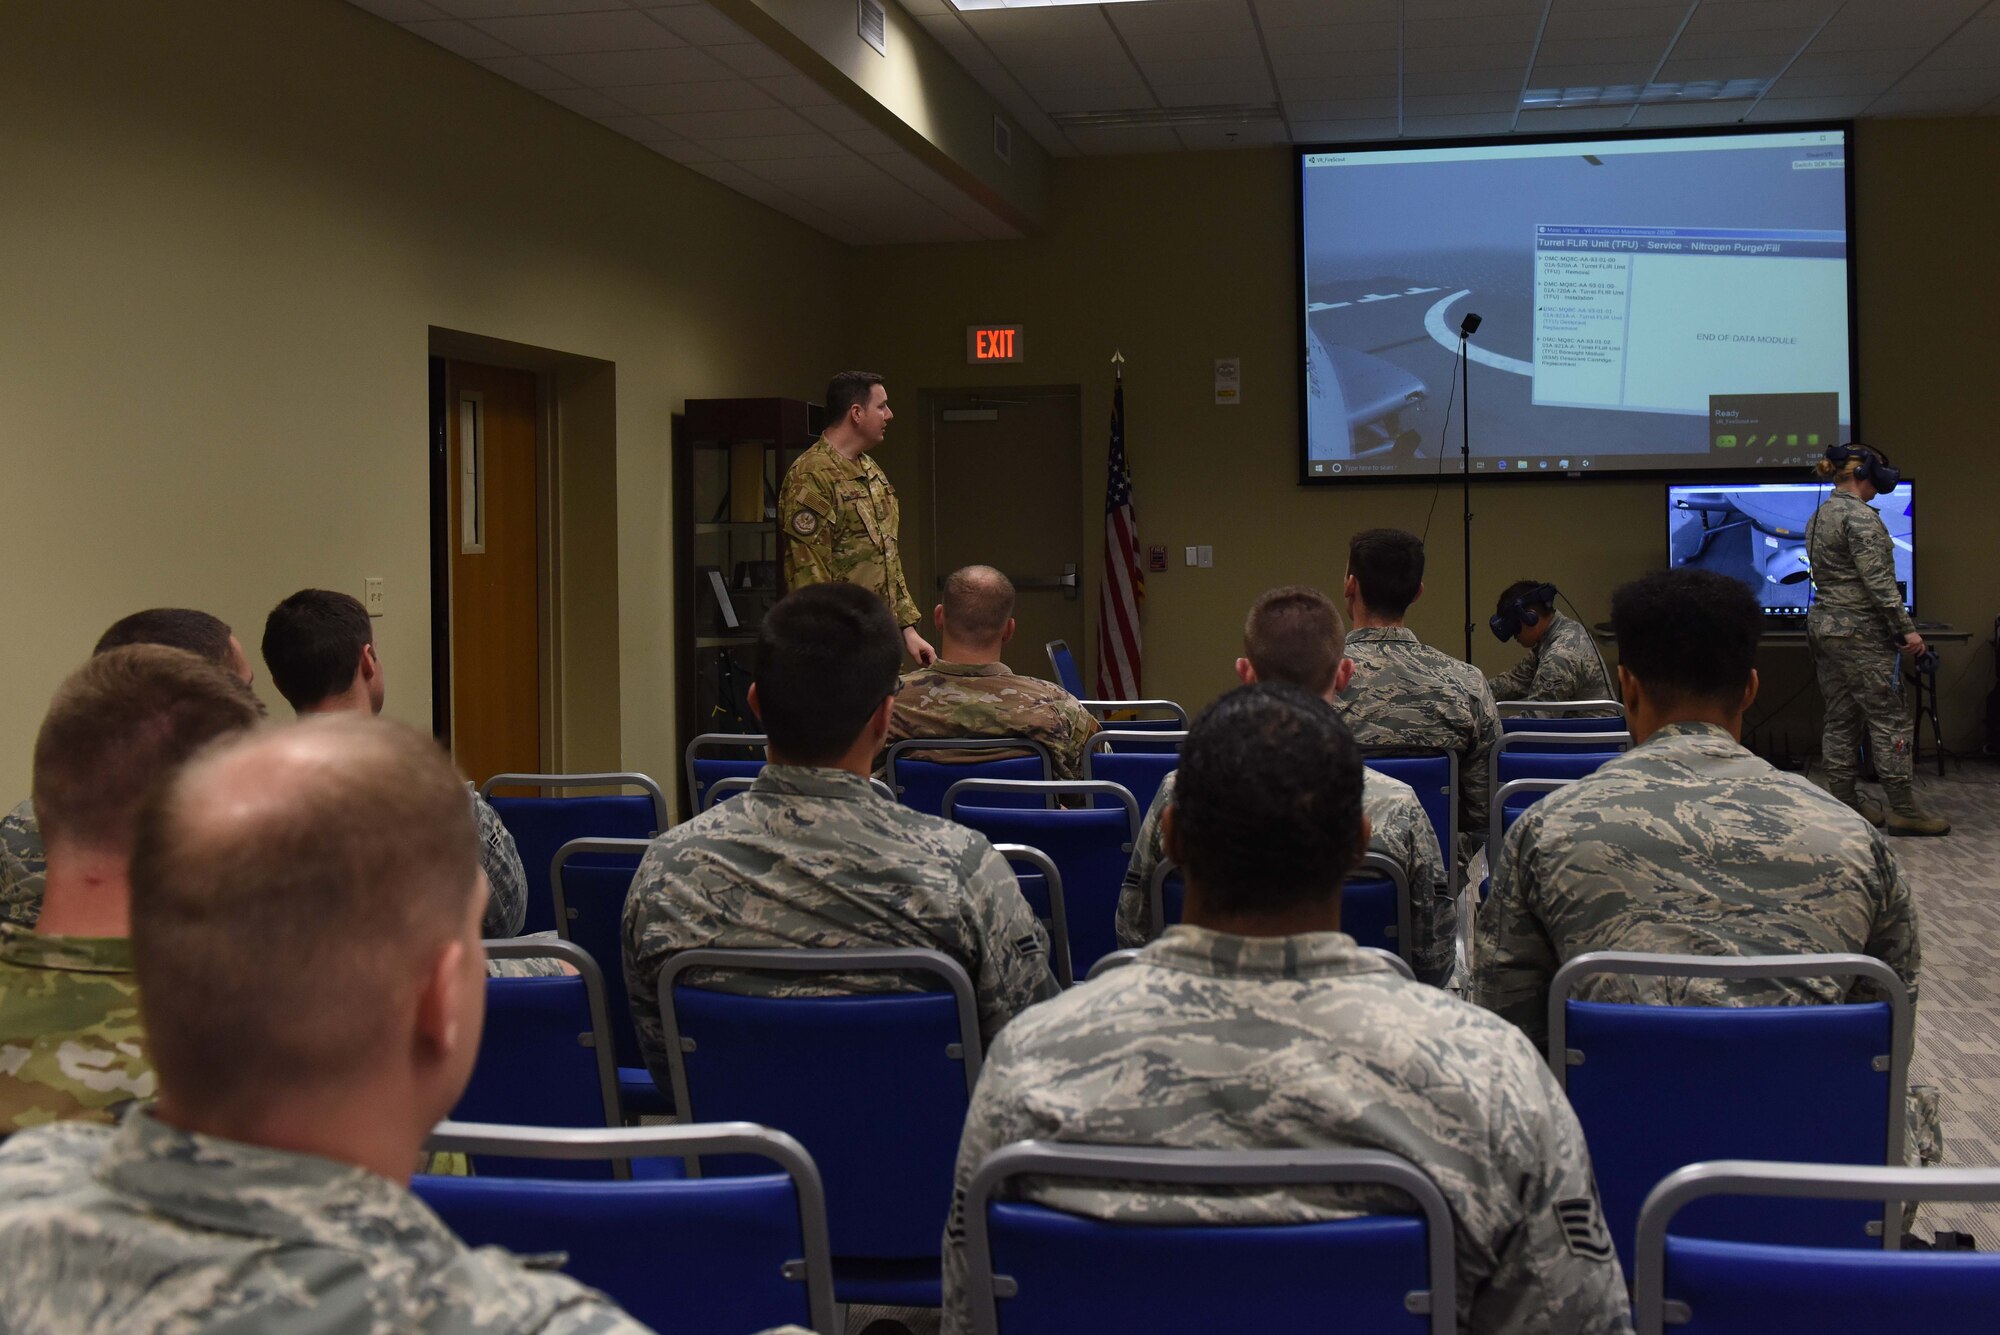 A man dressed in operational camouflage pattern speaks to a crowd of military service members in front of a large projected screen